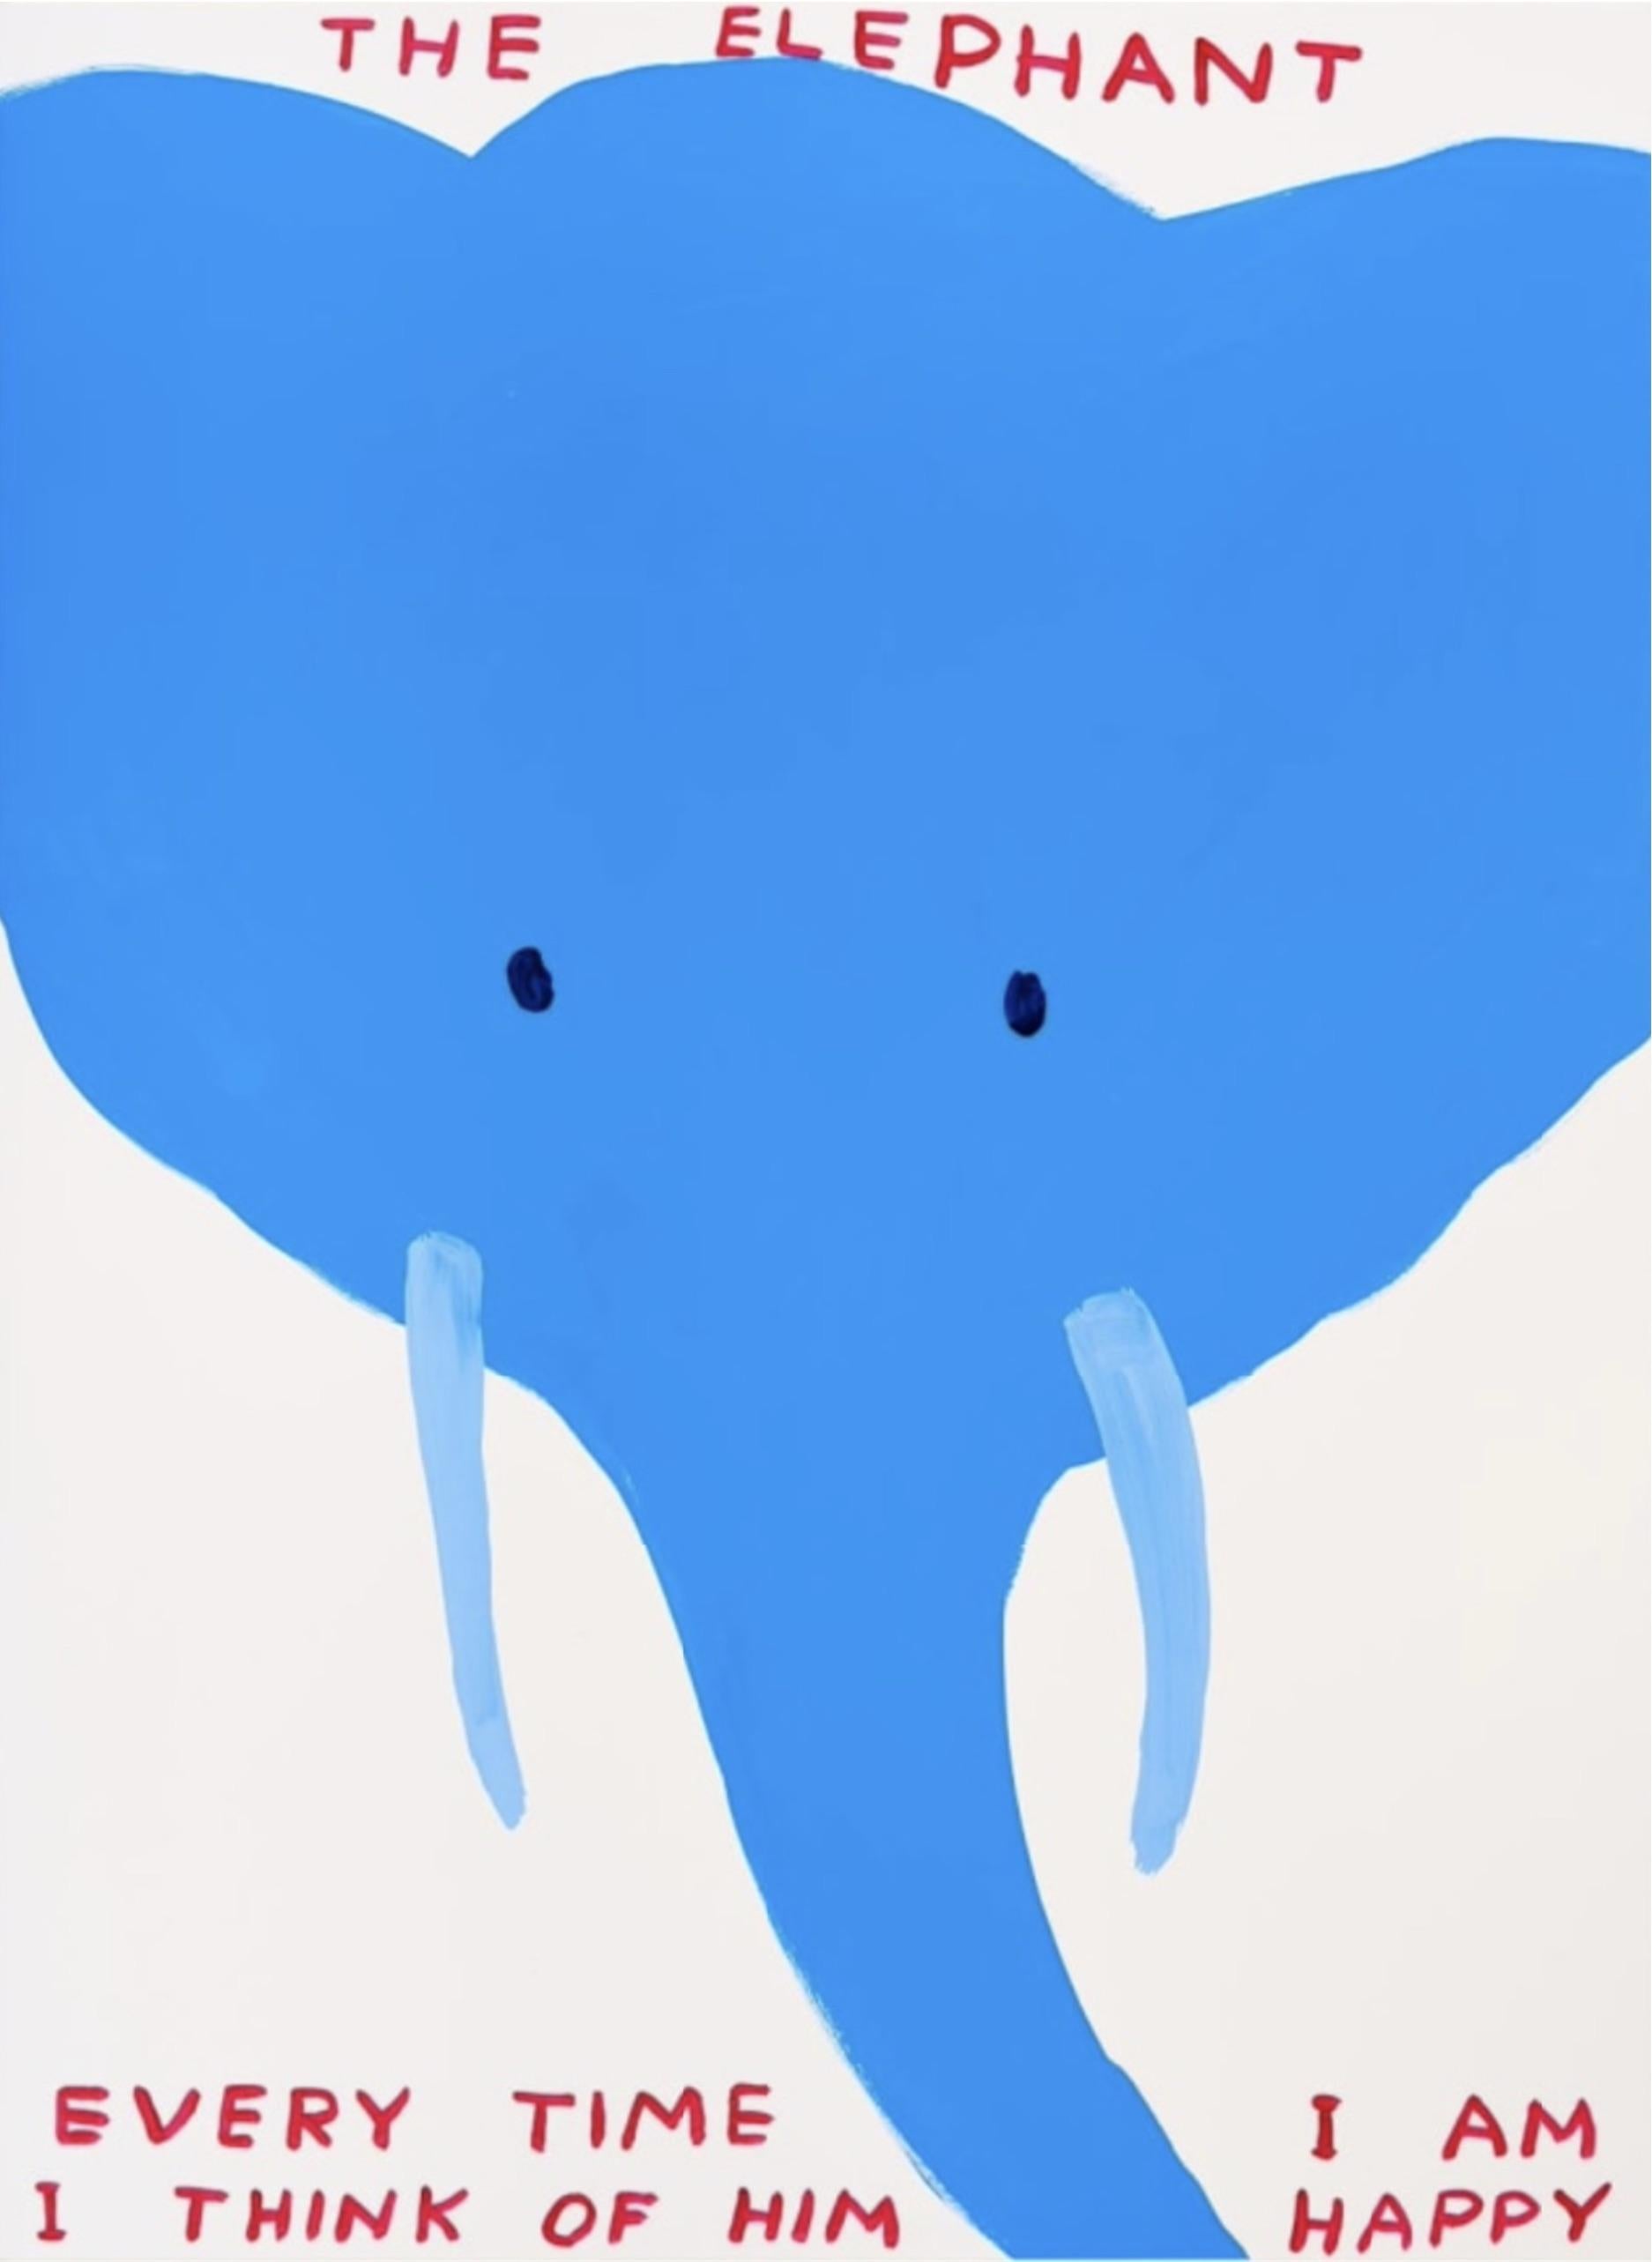 David Shrigley
Untitled (The Elephant, Every Time I Think of Him I am Happy), 2022
Screenprint in colours
29 1/2 × 22 in  75 × 56 cm
Edition of 125